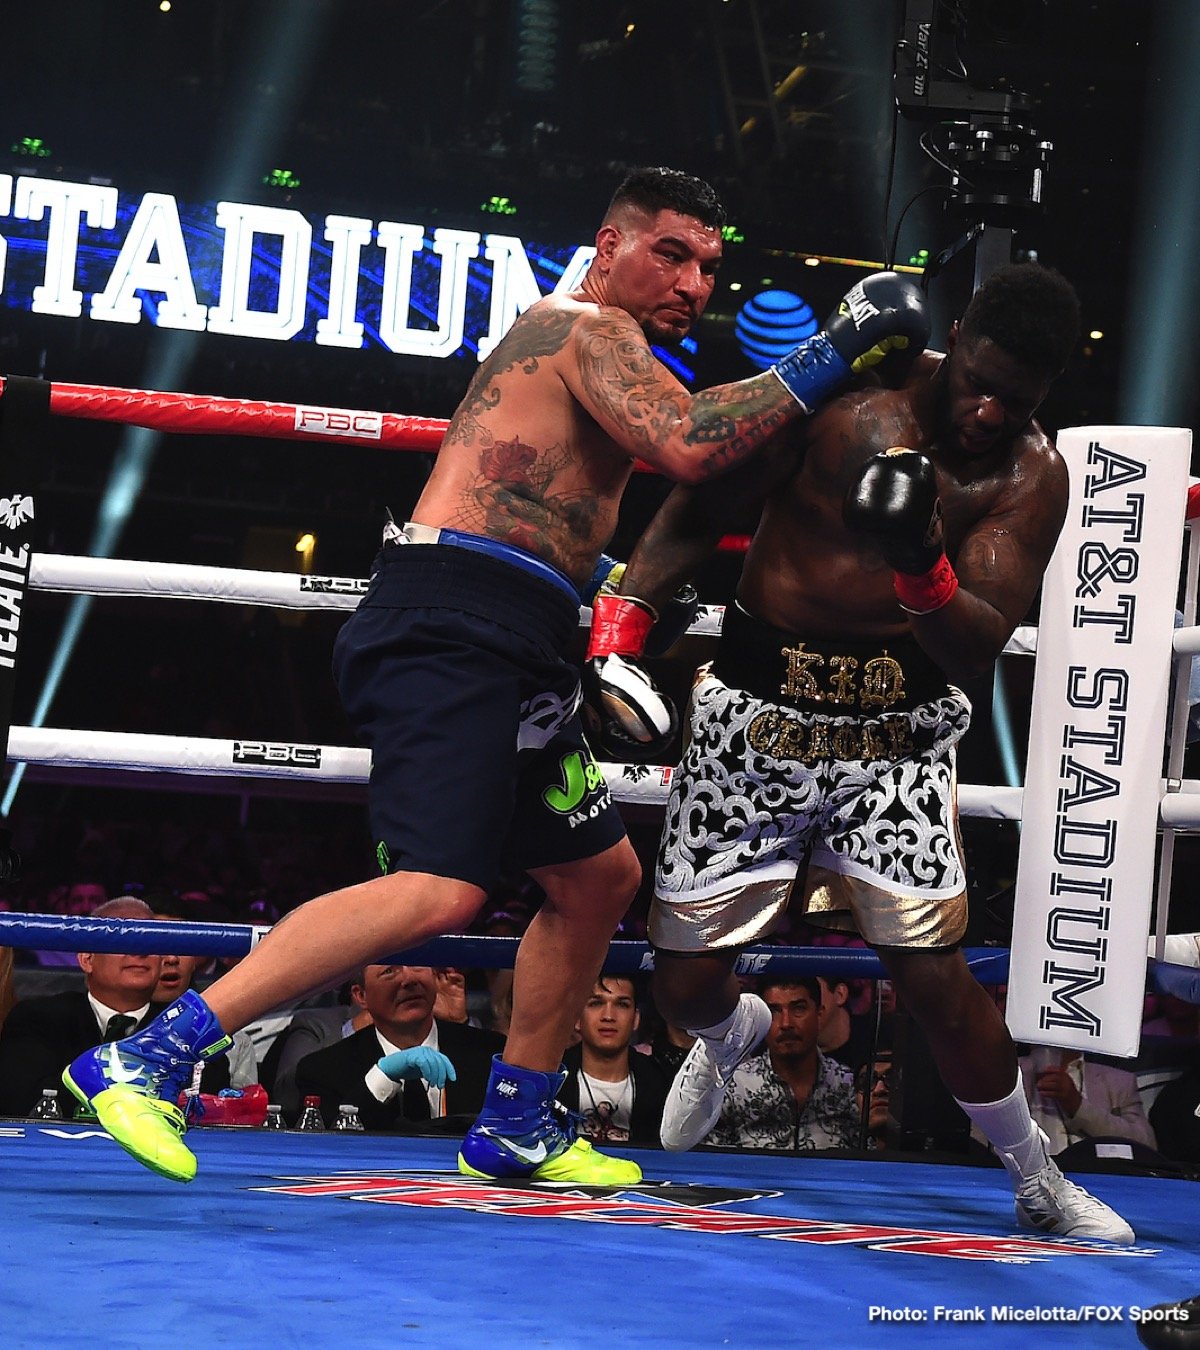 Chris Arreola Hammers Jean Pierre Augustin In Third-Round Stoppage Win: “I'm Title-Chasing Not Cheque-Chasing”